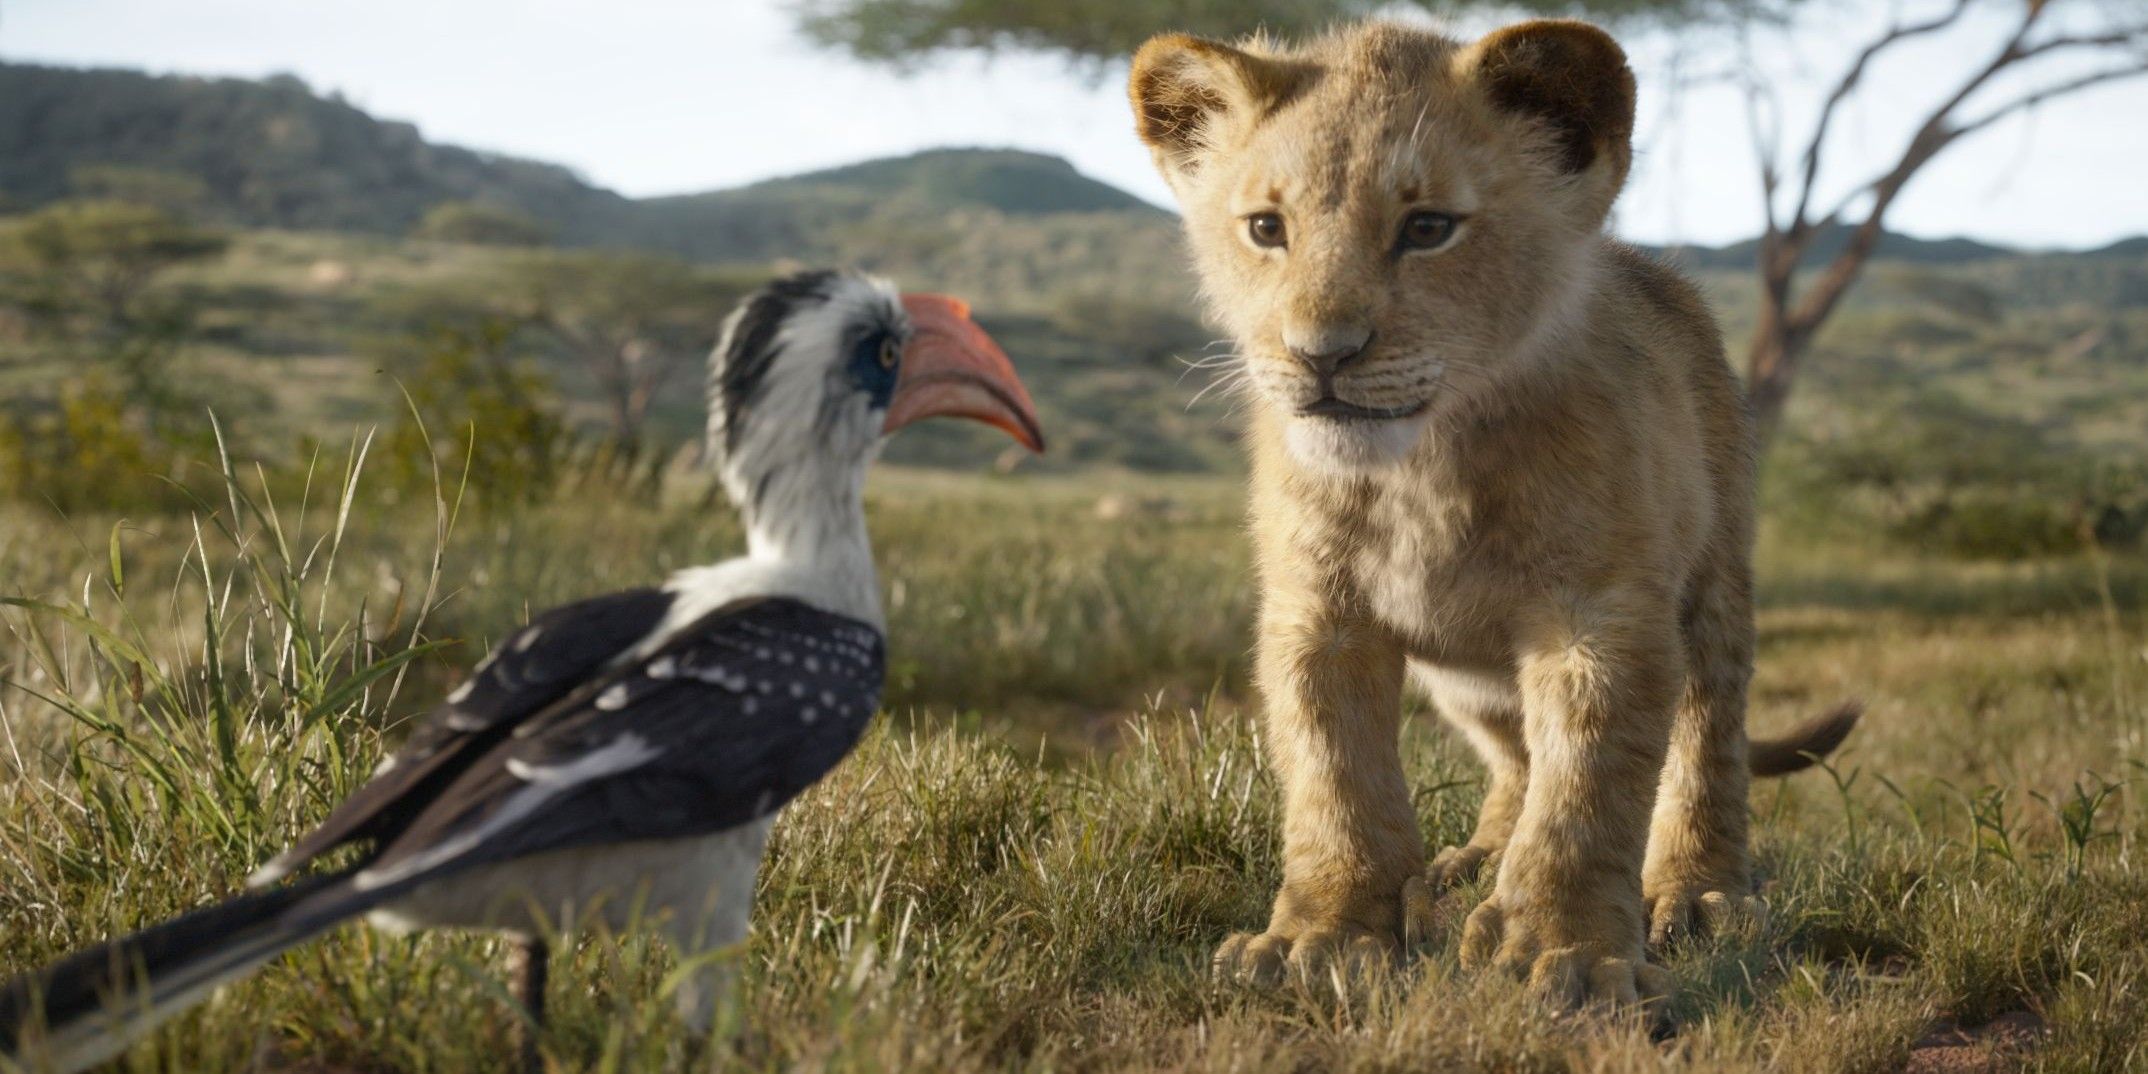 Zazu and Simba in The Lion King 2019